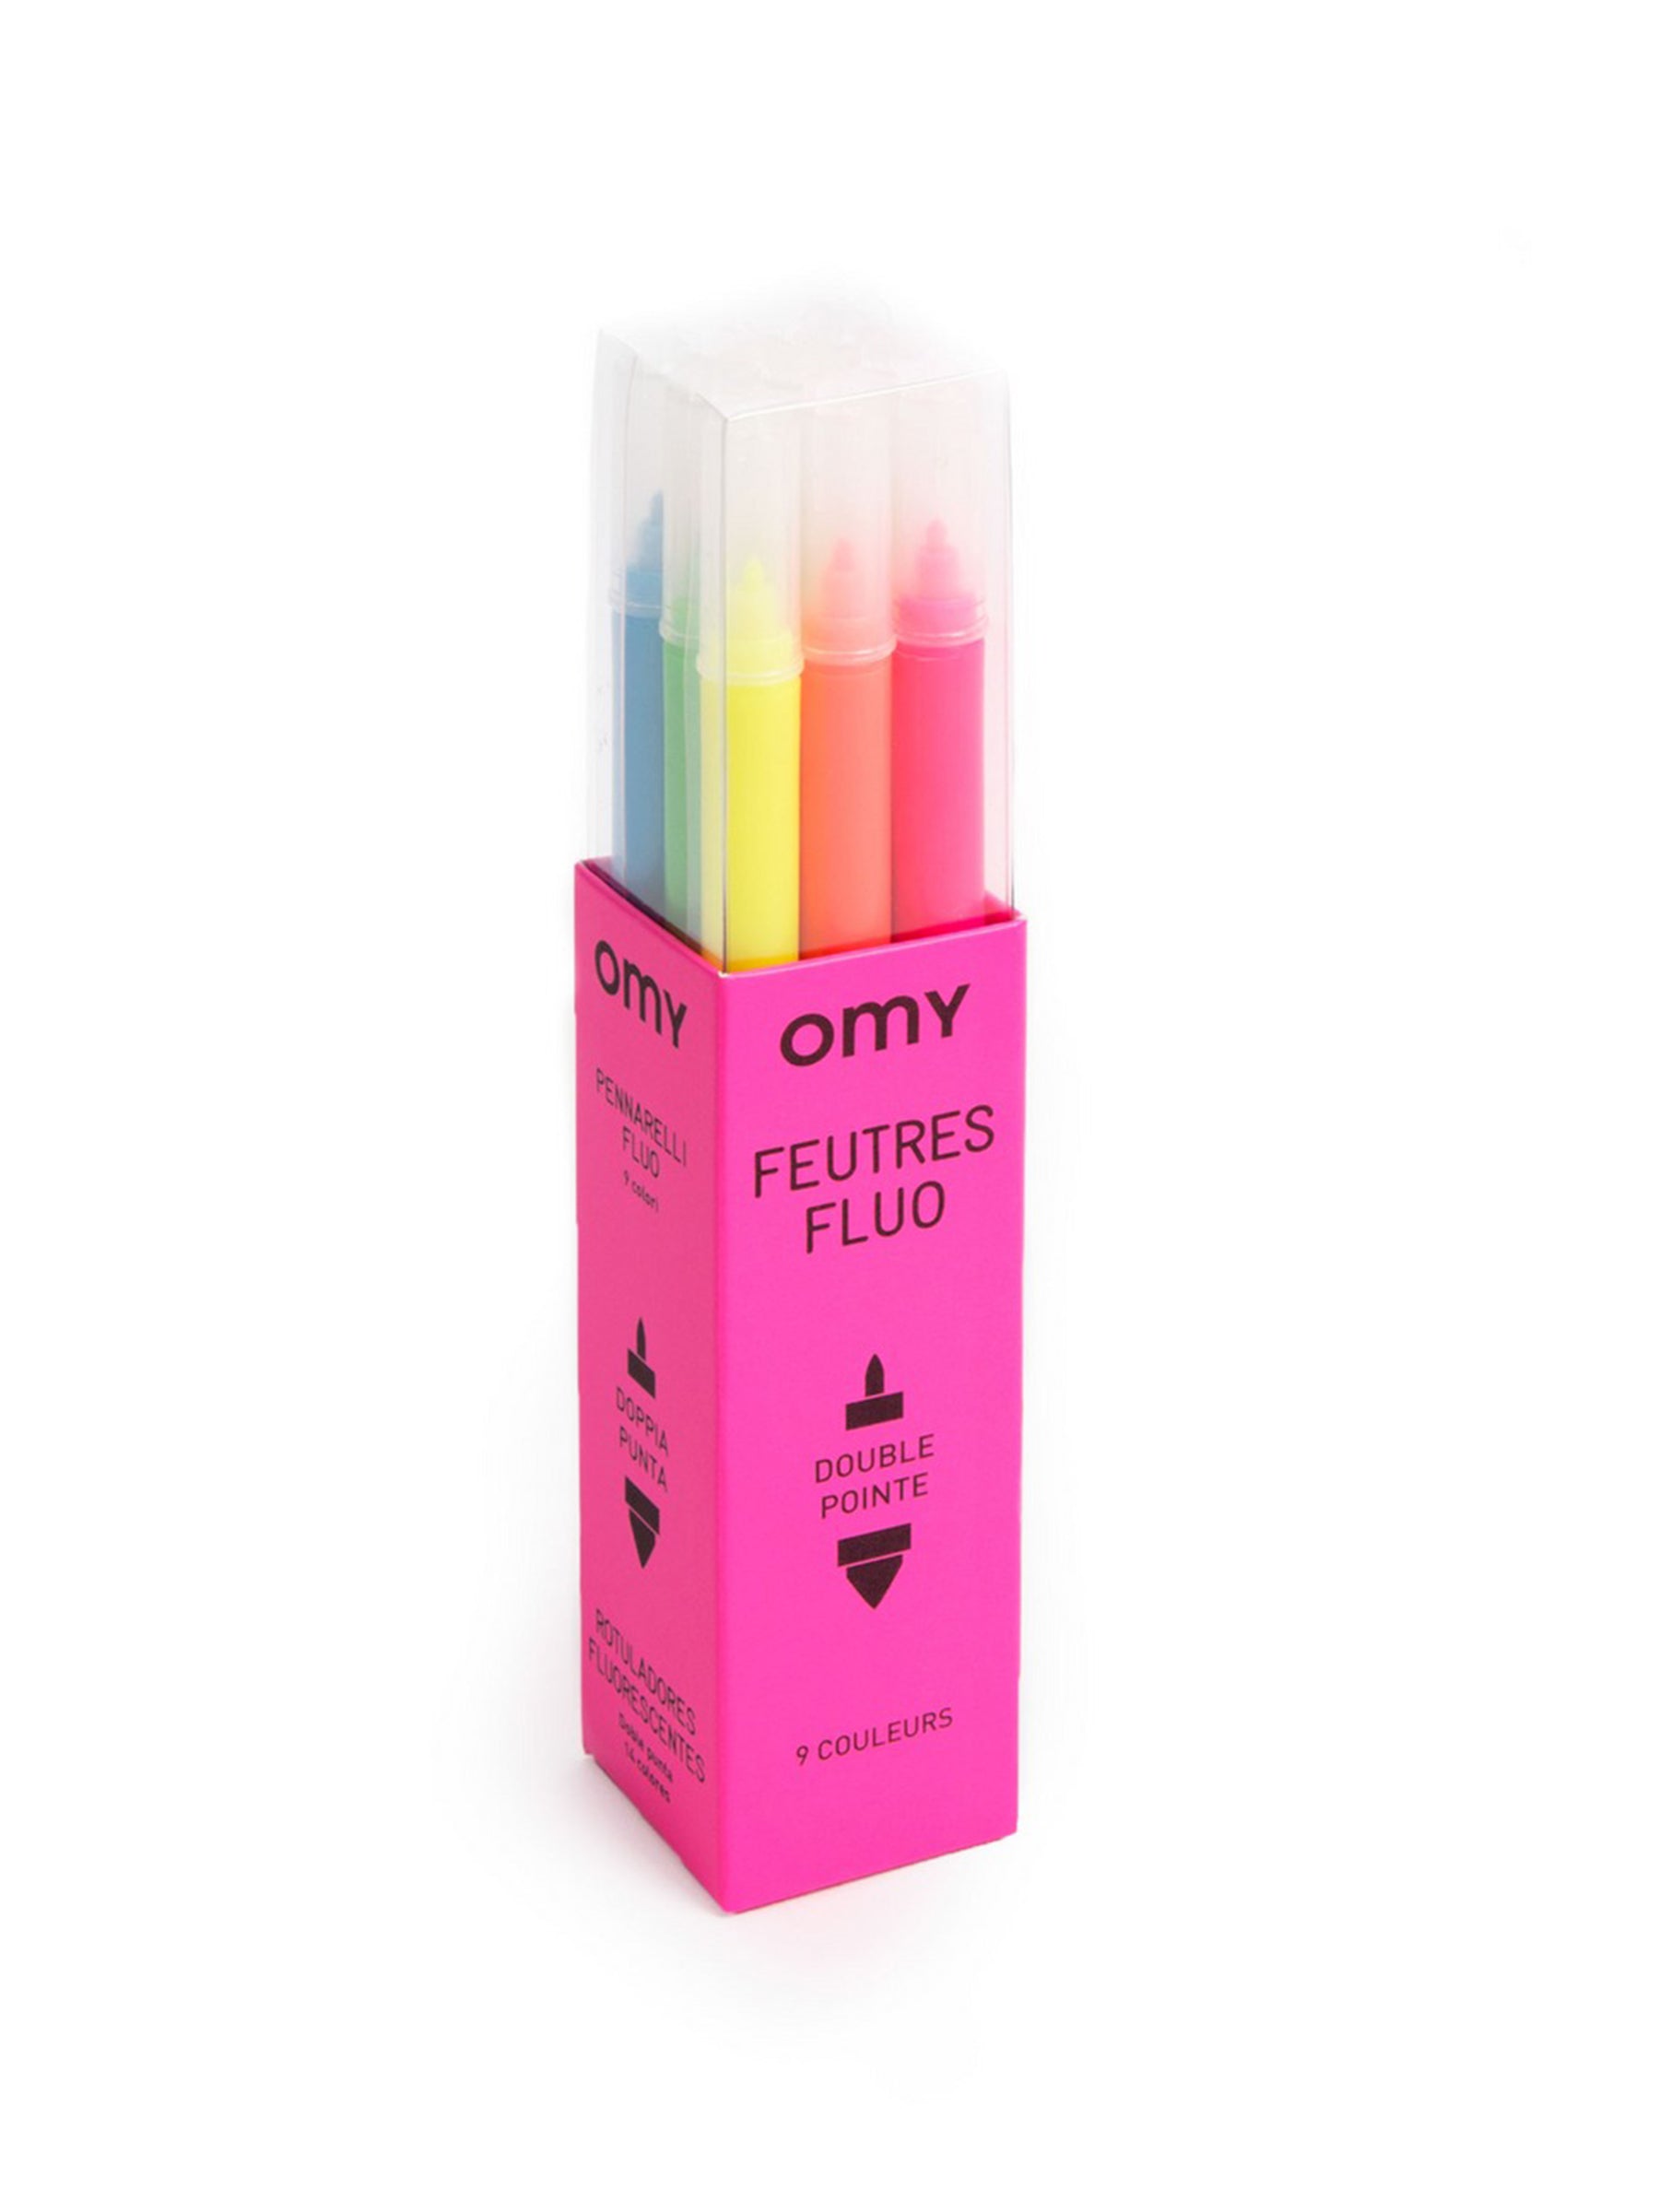 OMY 9 Neon Markers